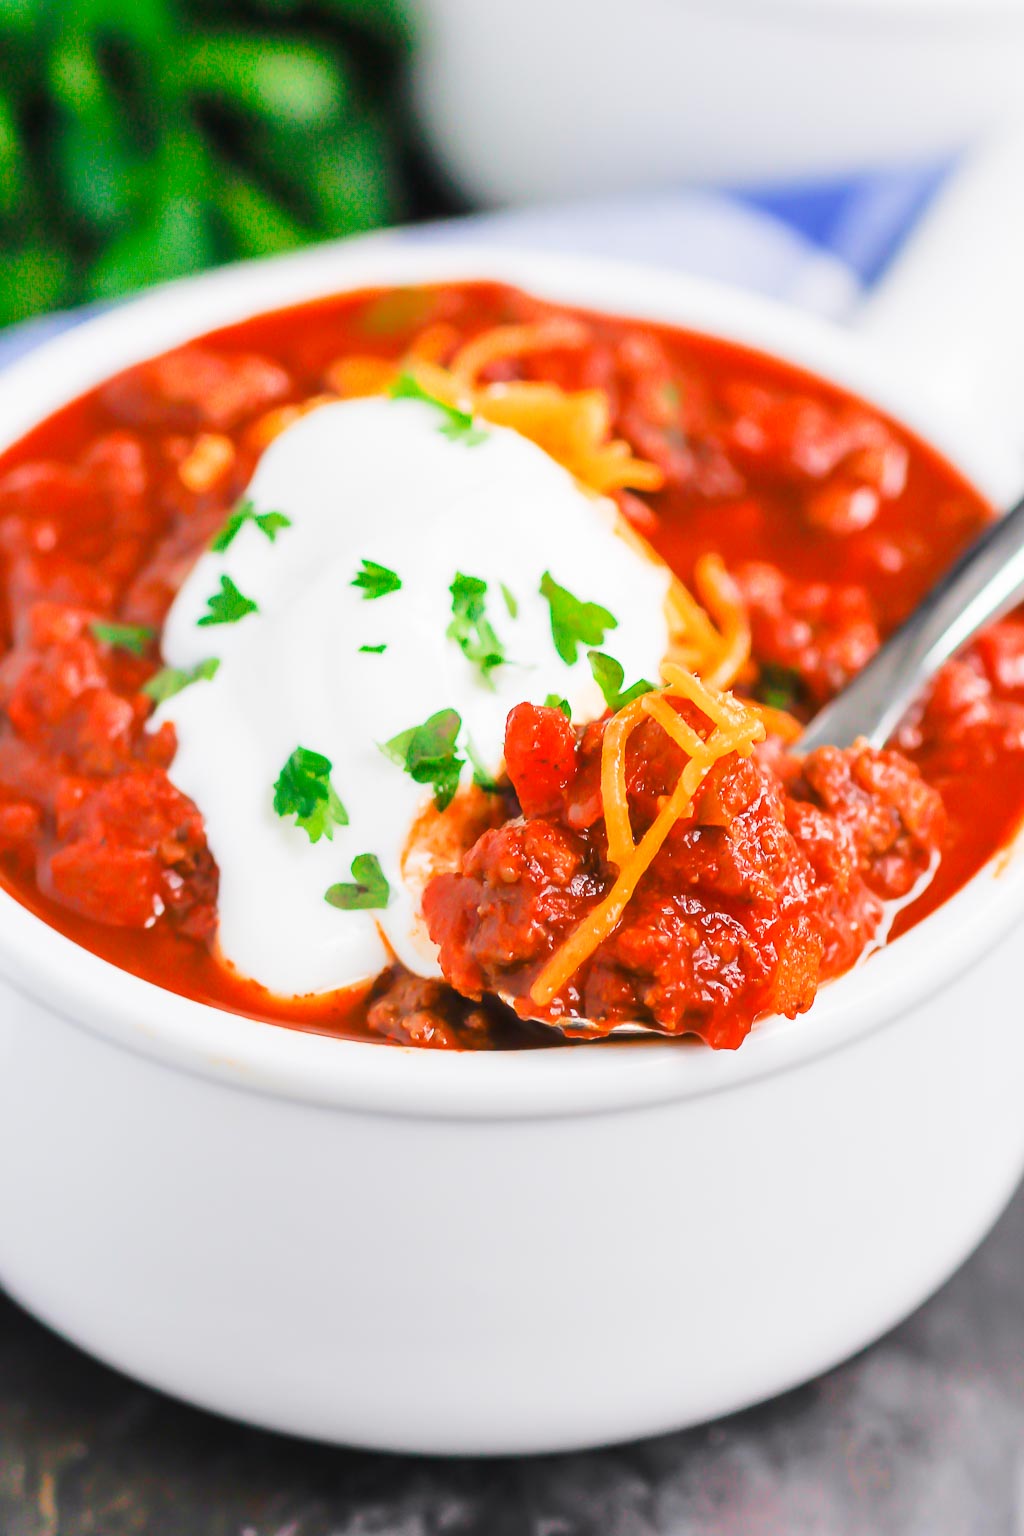 Instant Pot No Bean Chili is a simple, hearty meal that's ready in no time. Made with two types of ground beef and loaded with flavor, you'll never miss the beans in this cozy dish! #chili #nobeanchili #chilinobeans #instantpot #instantpotchili #Instantpotnobeanchili #dinner #comfortfood